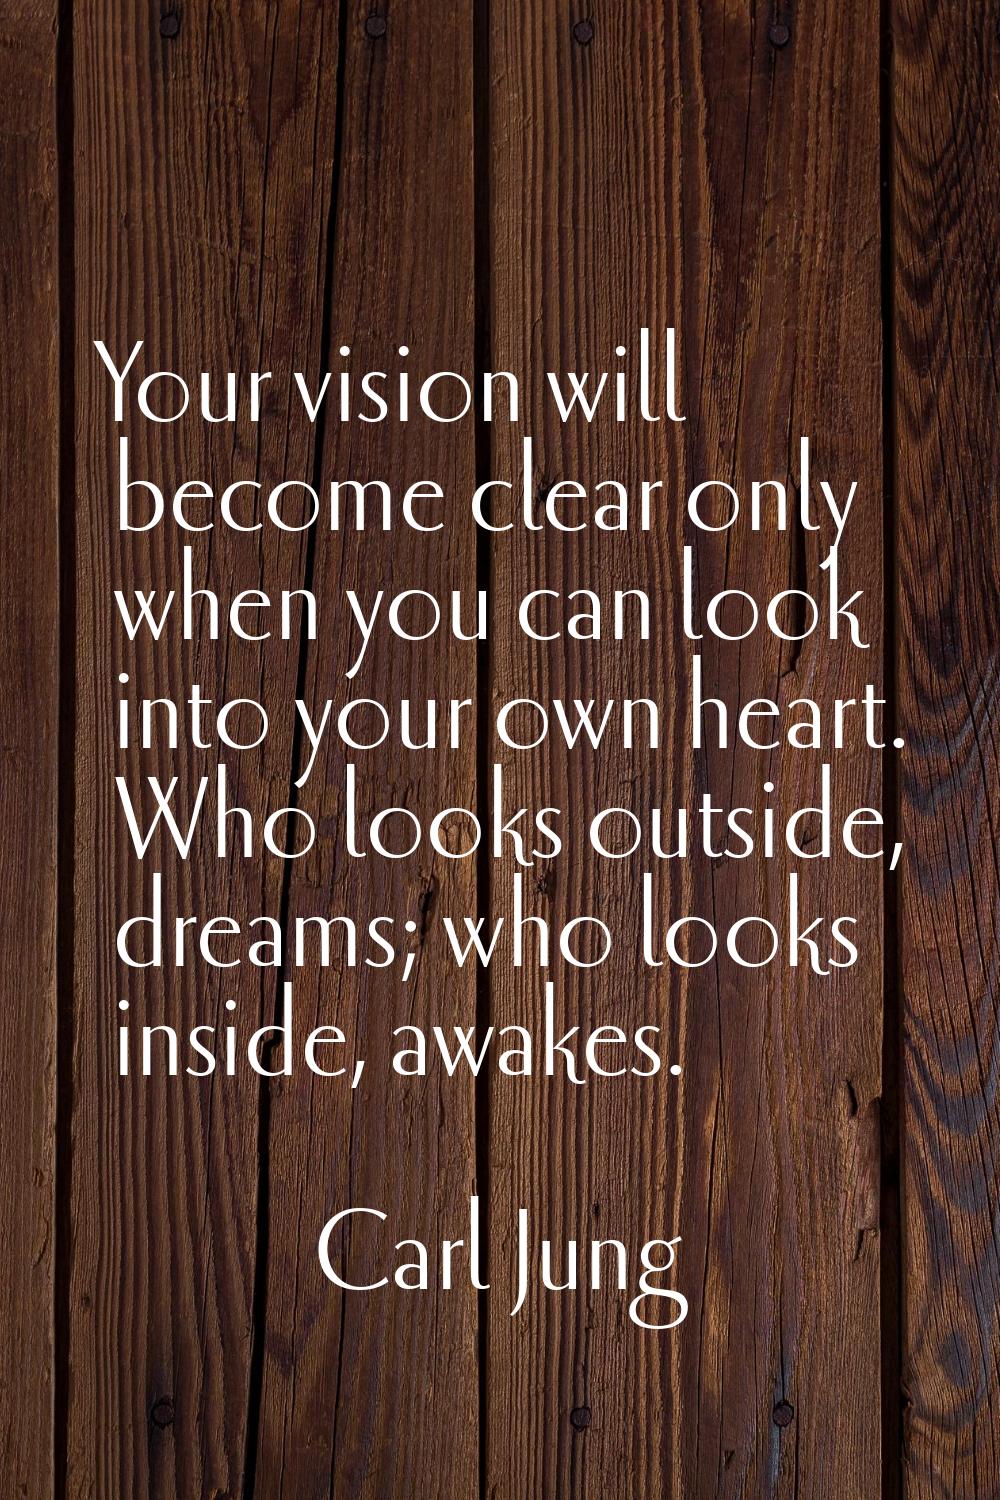 Your vision will become clear only when you can look into your own heart. Who looks outside, dreams